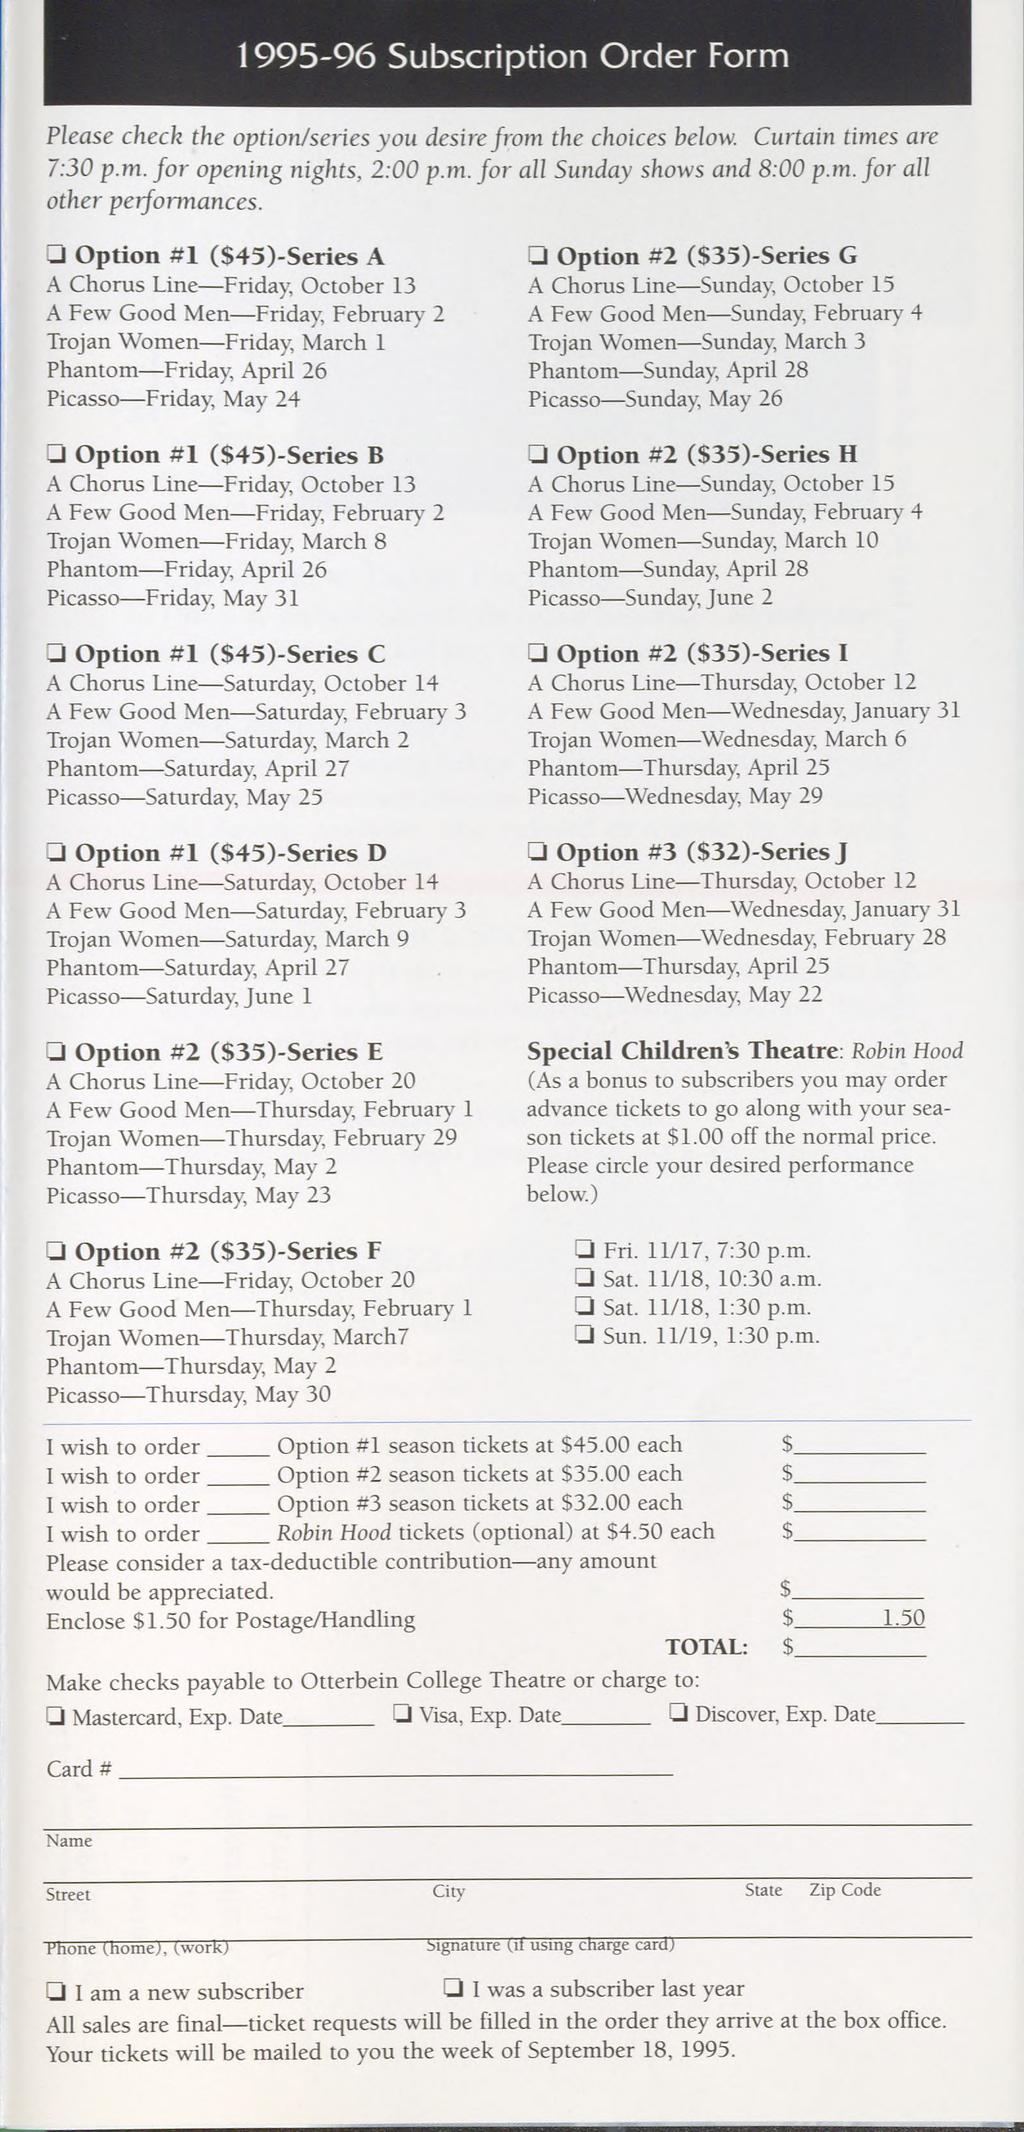 1995-96 Subscription Order Form Please check the option/series you desire from the choices below. Curtain times are 7:30 p.m. for opening nights, 2:00 p.m. for all Sunday shows and 8:00 p.m. for all other performances.